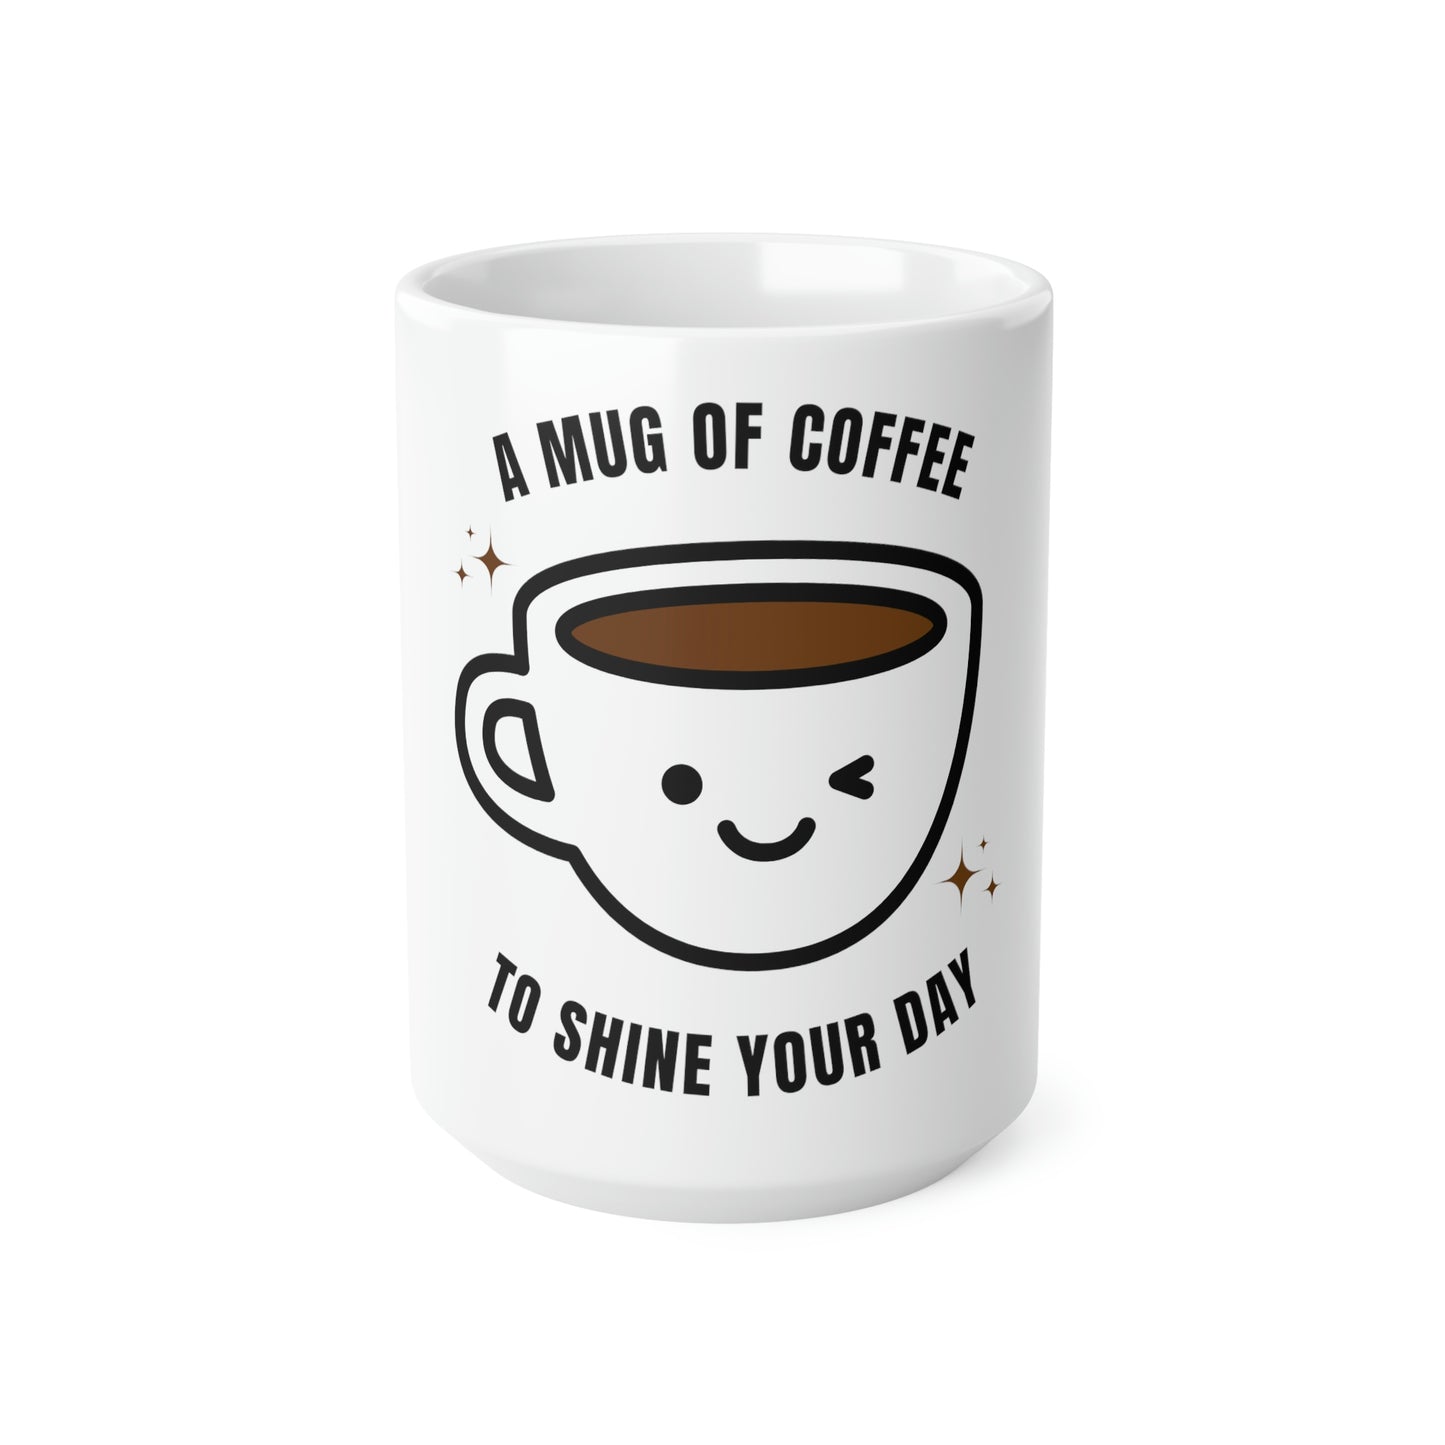 A mug of coffee to shine your day Ceramic Coffee Cups, 11oz, 15oz gift funny humor hot drink need work drink mug cute tea small personalized